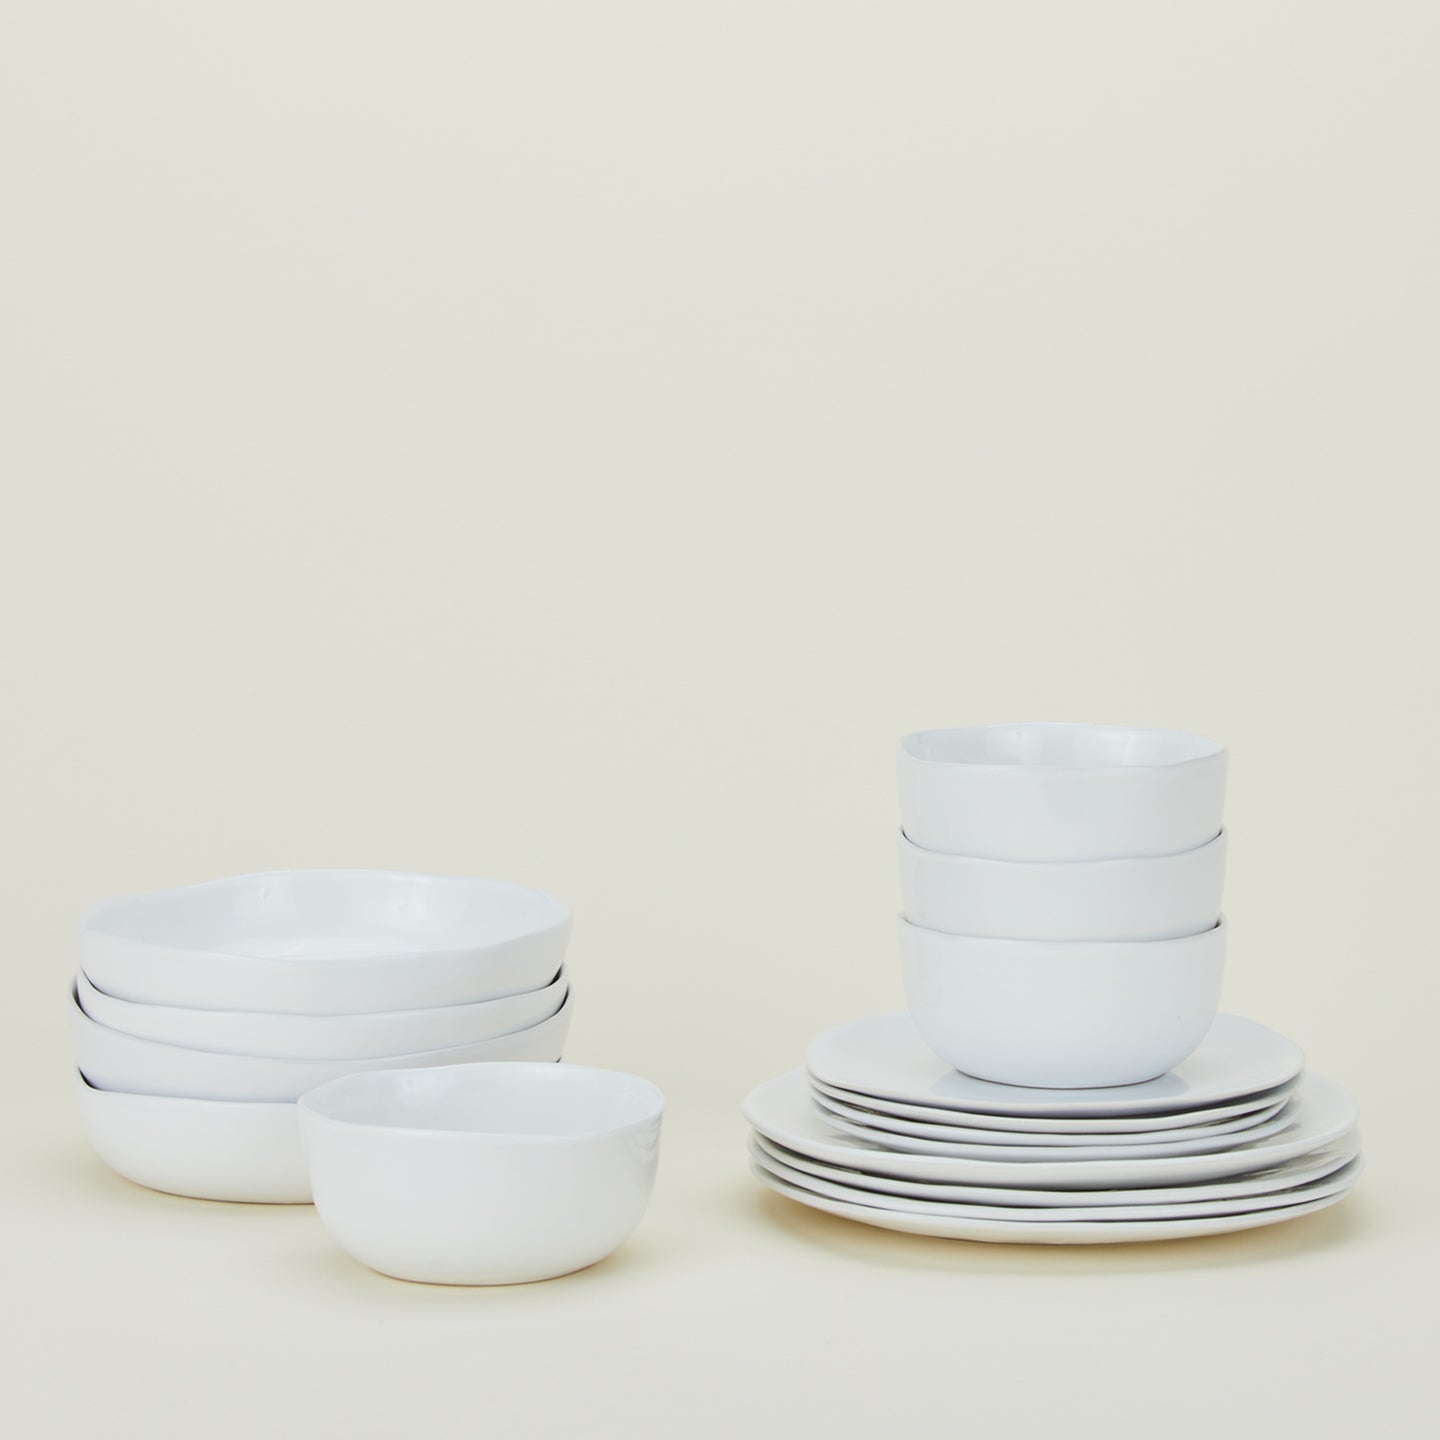 Set of white Strata dinnerware including Large Bowls, Low Bowls, Salad Plates, Dinner Plates and Mugs.